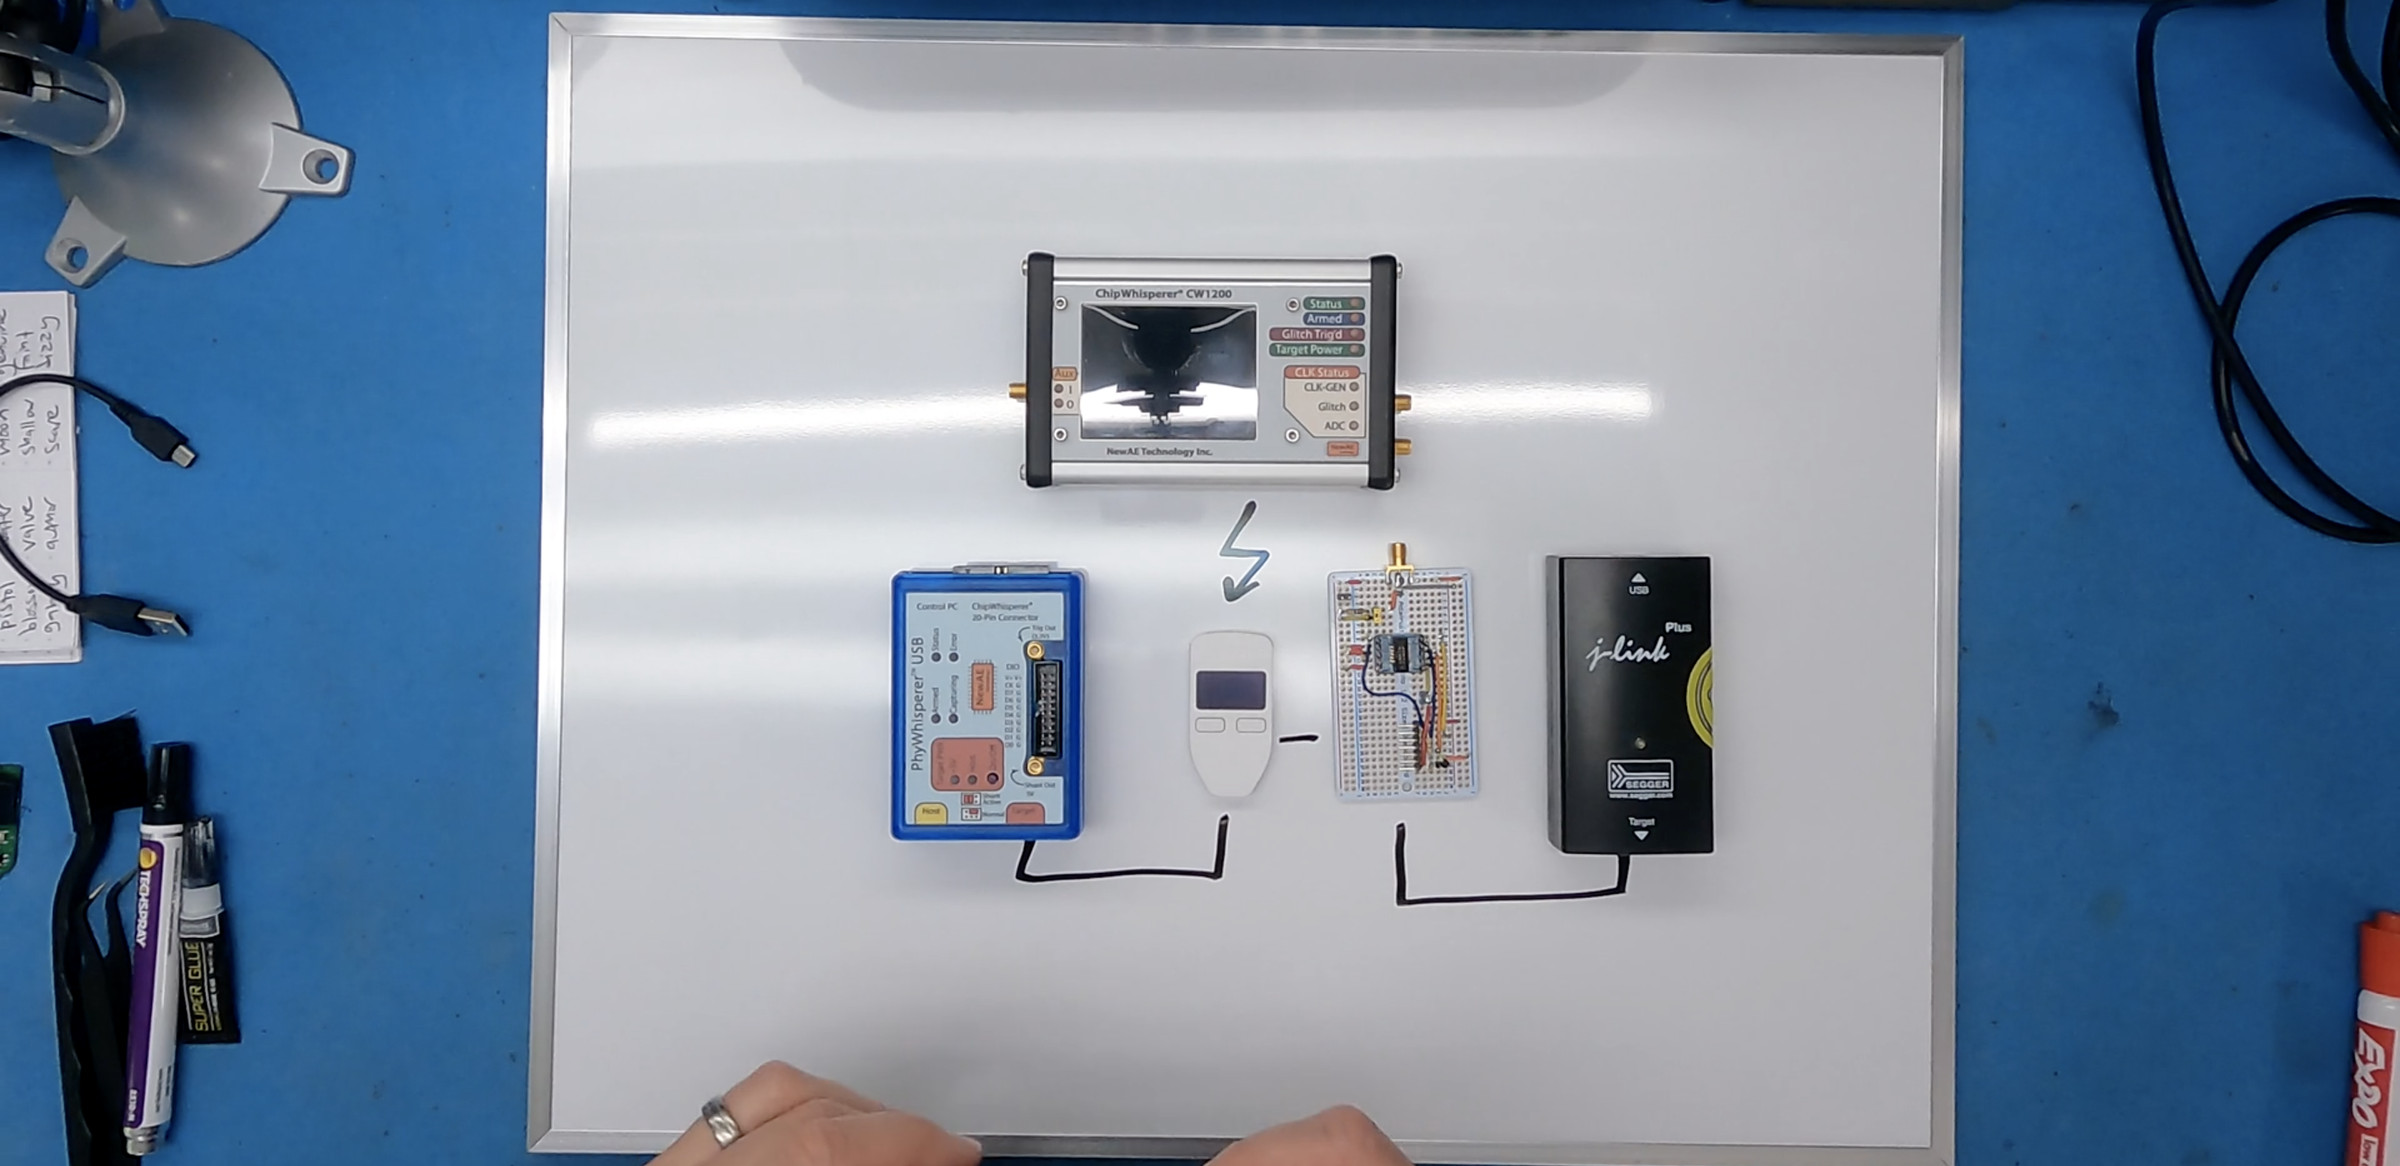 Five electronic devices sit on a whiteboard, with diagram lines connecting them in an outline of Grand’s proposed hack: the CW 1200 sites on top, then a second row including the PhyWhisperer, the Trezor, an interface chipboard, and the J-link probe, from left to right.